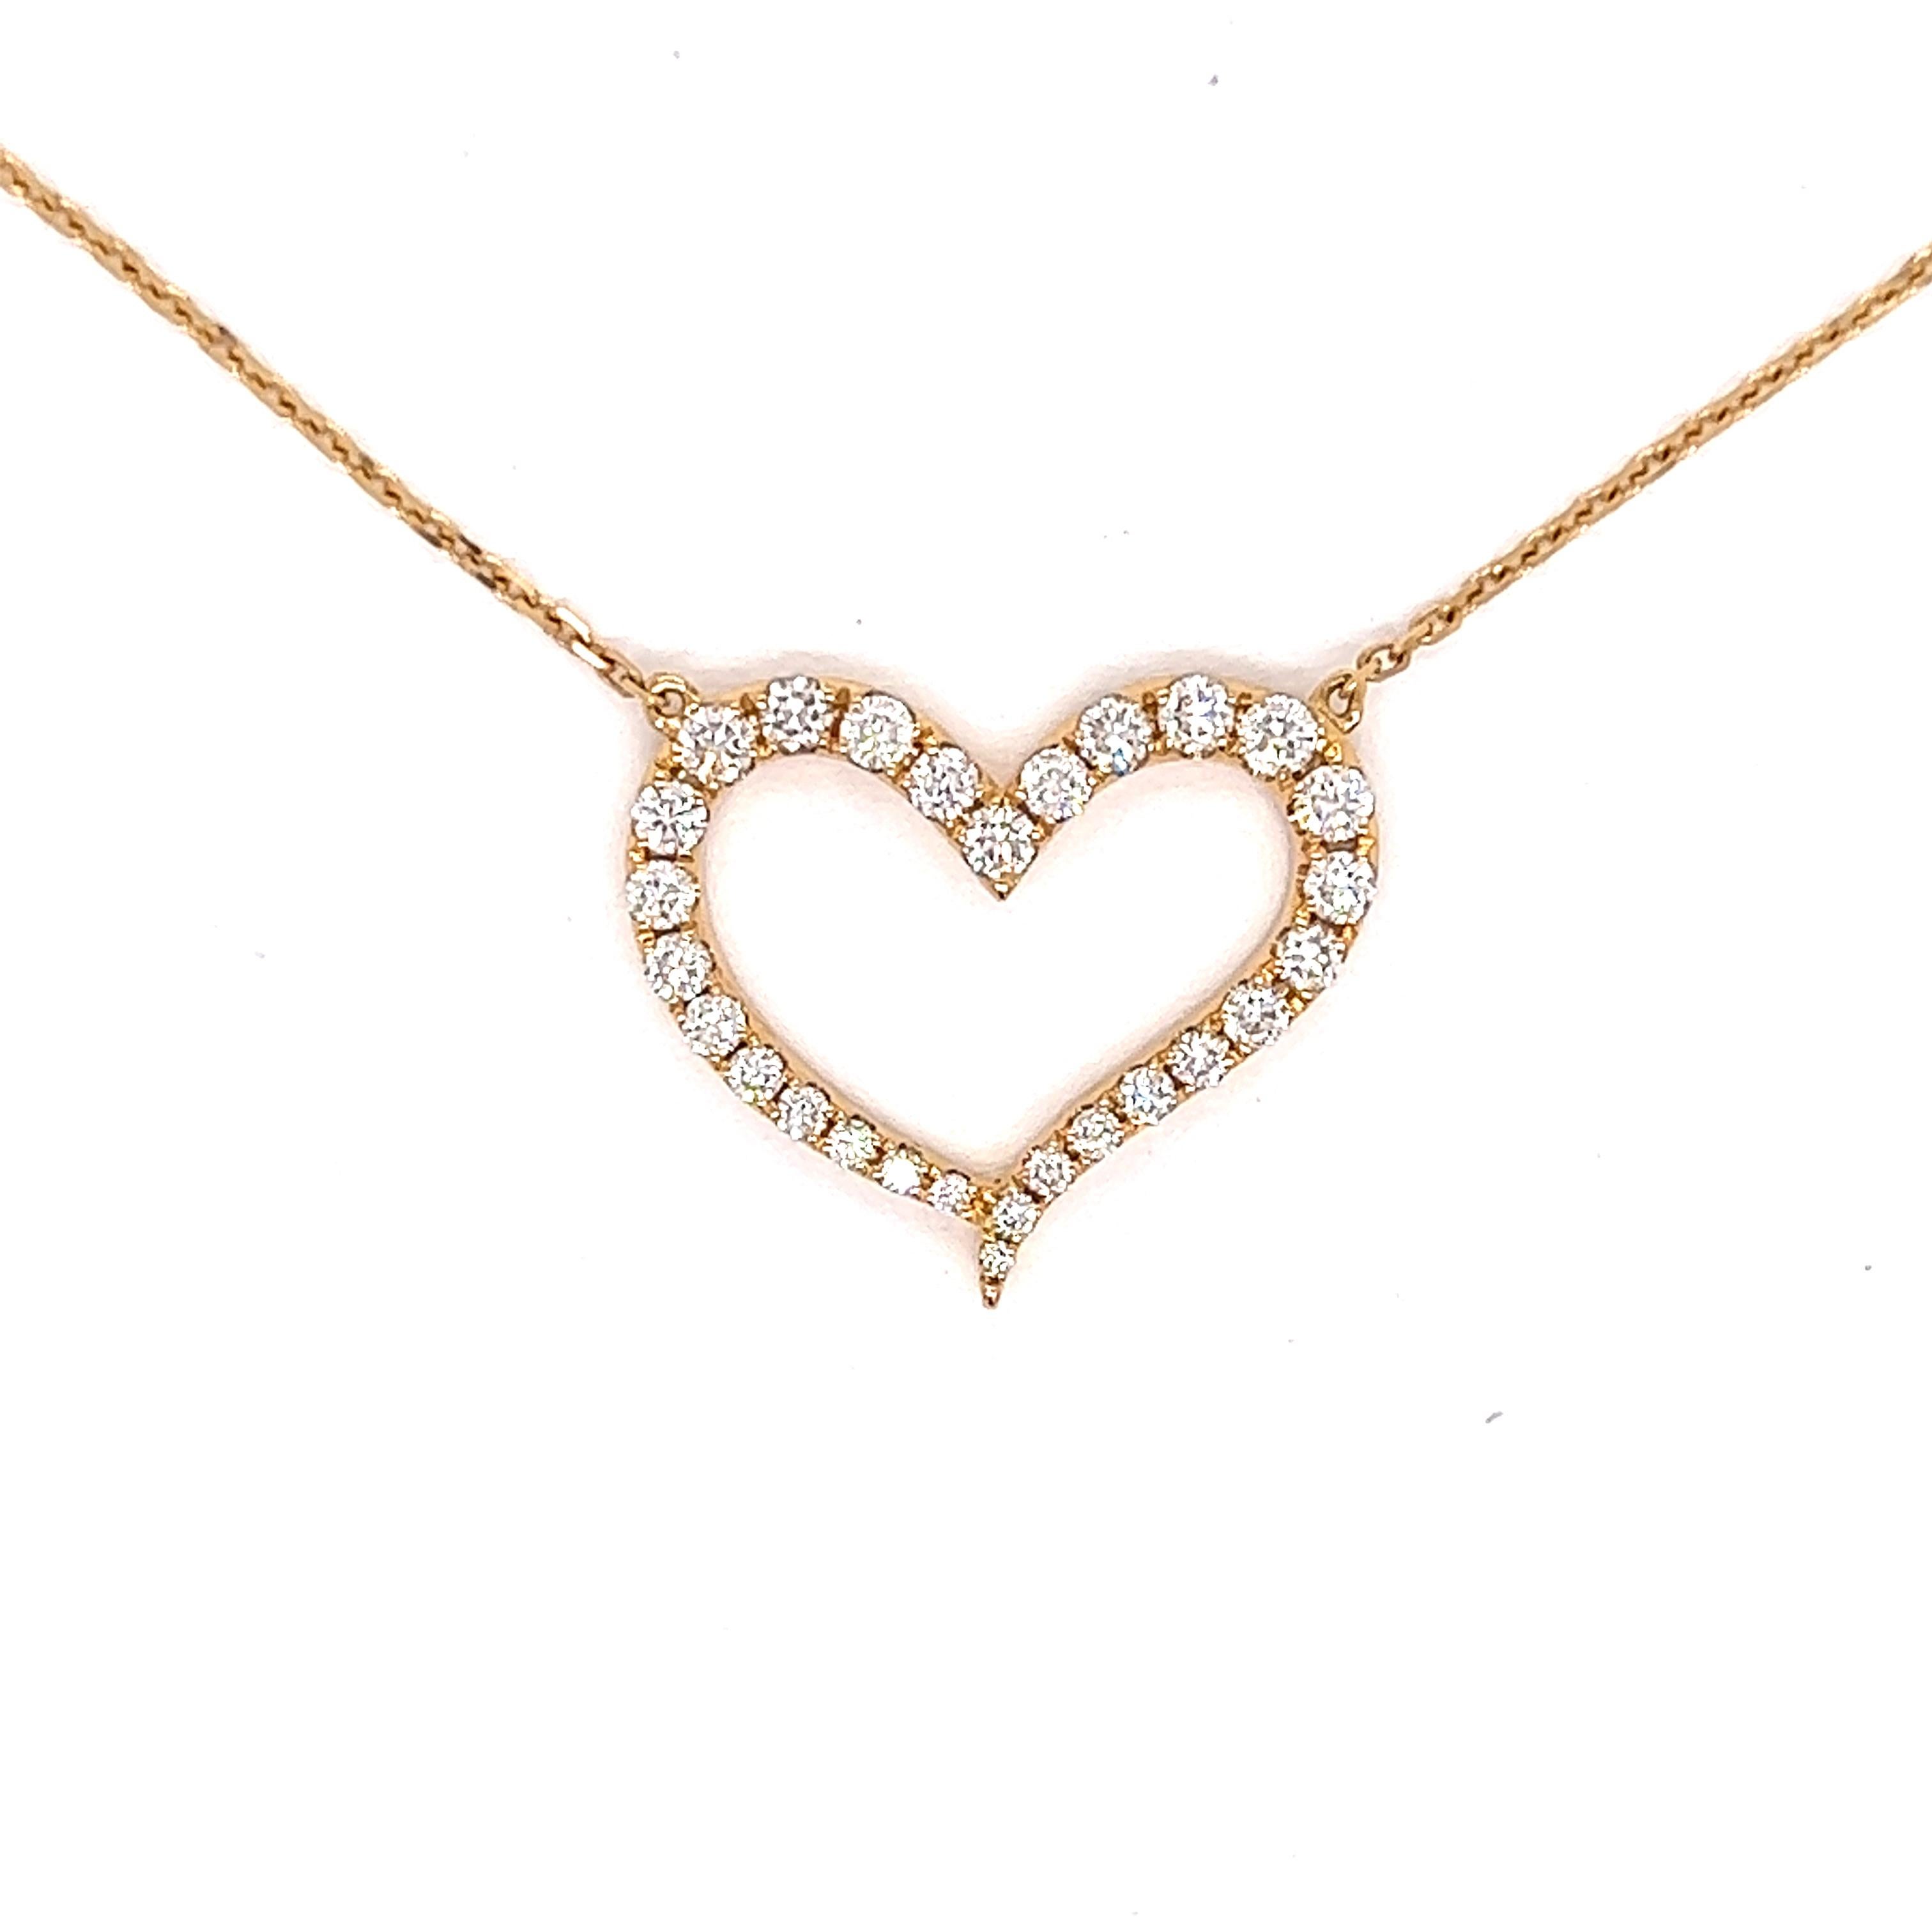 Round Cut Heart Diamond Necklace in 18kt Yellow Gold